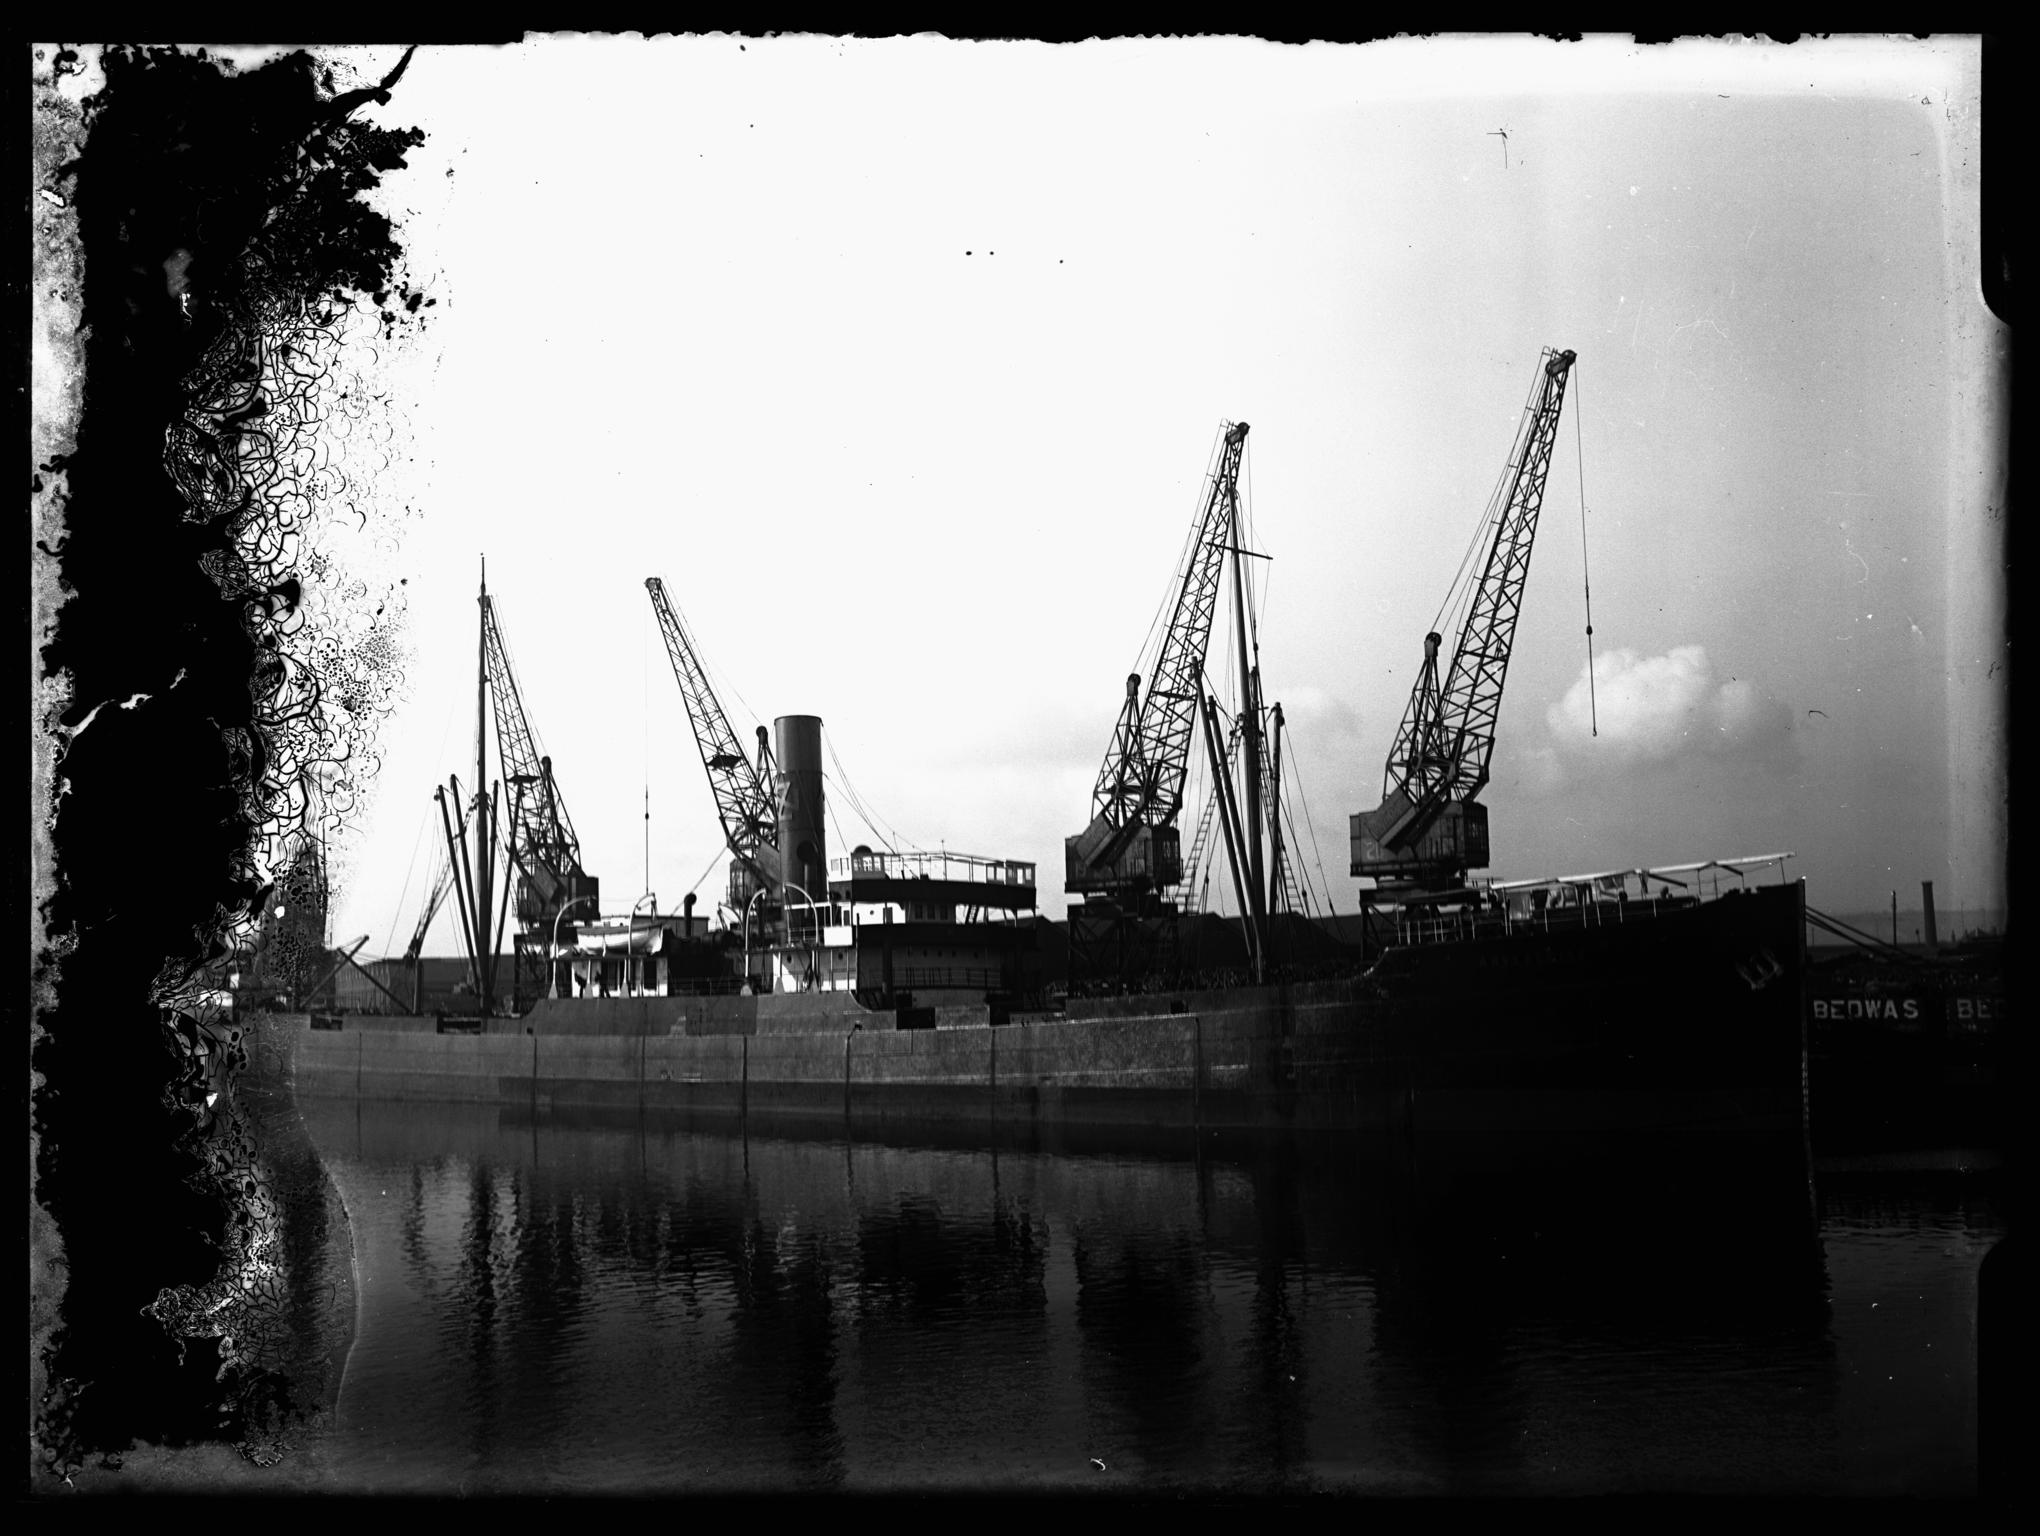 S.S. ANVERSOISE, glass negative